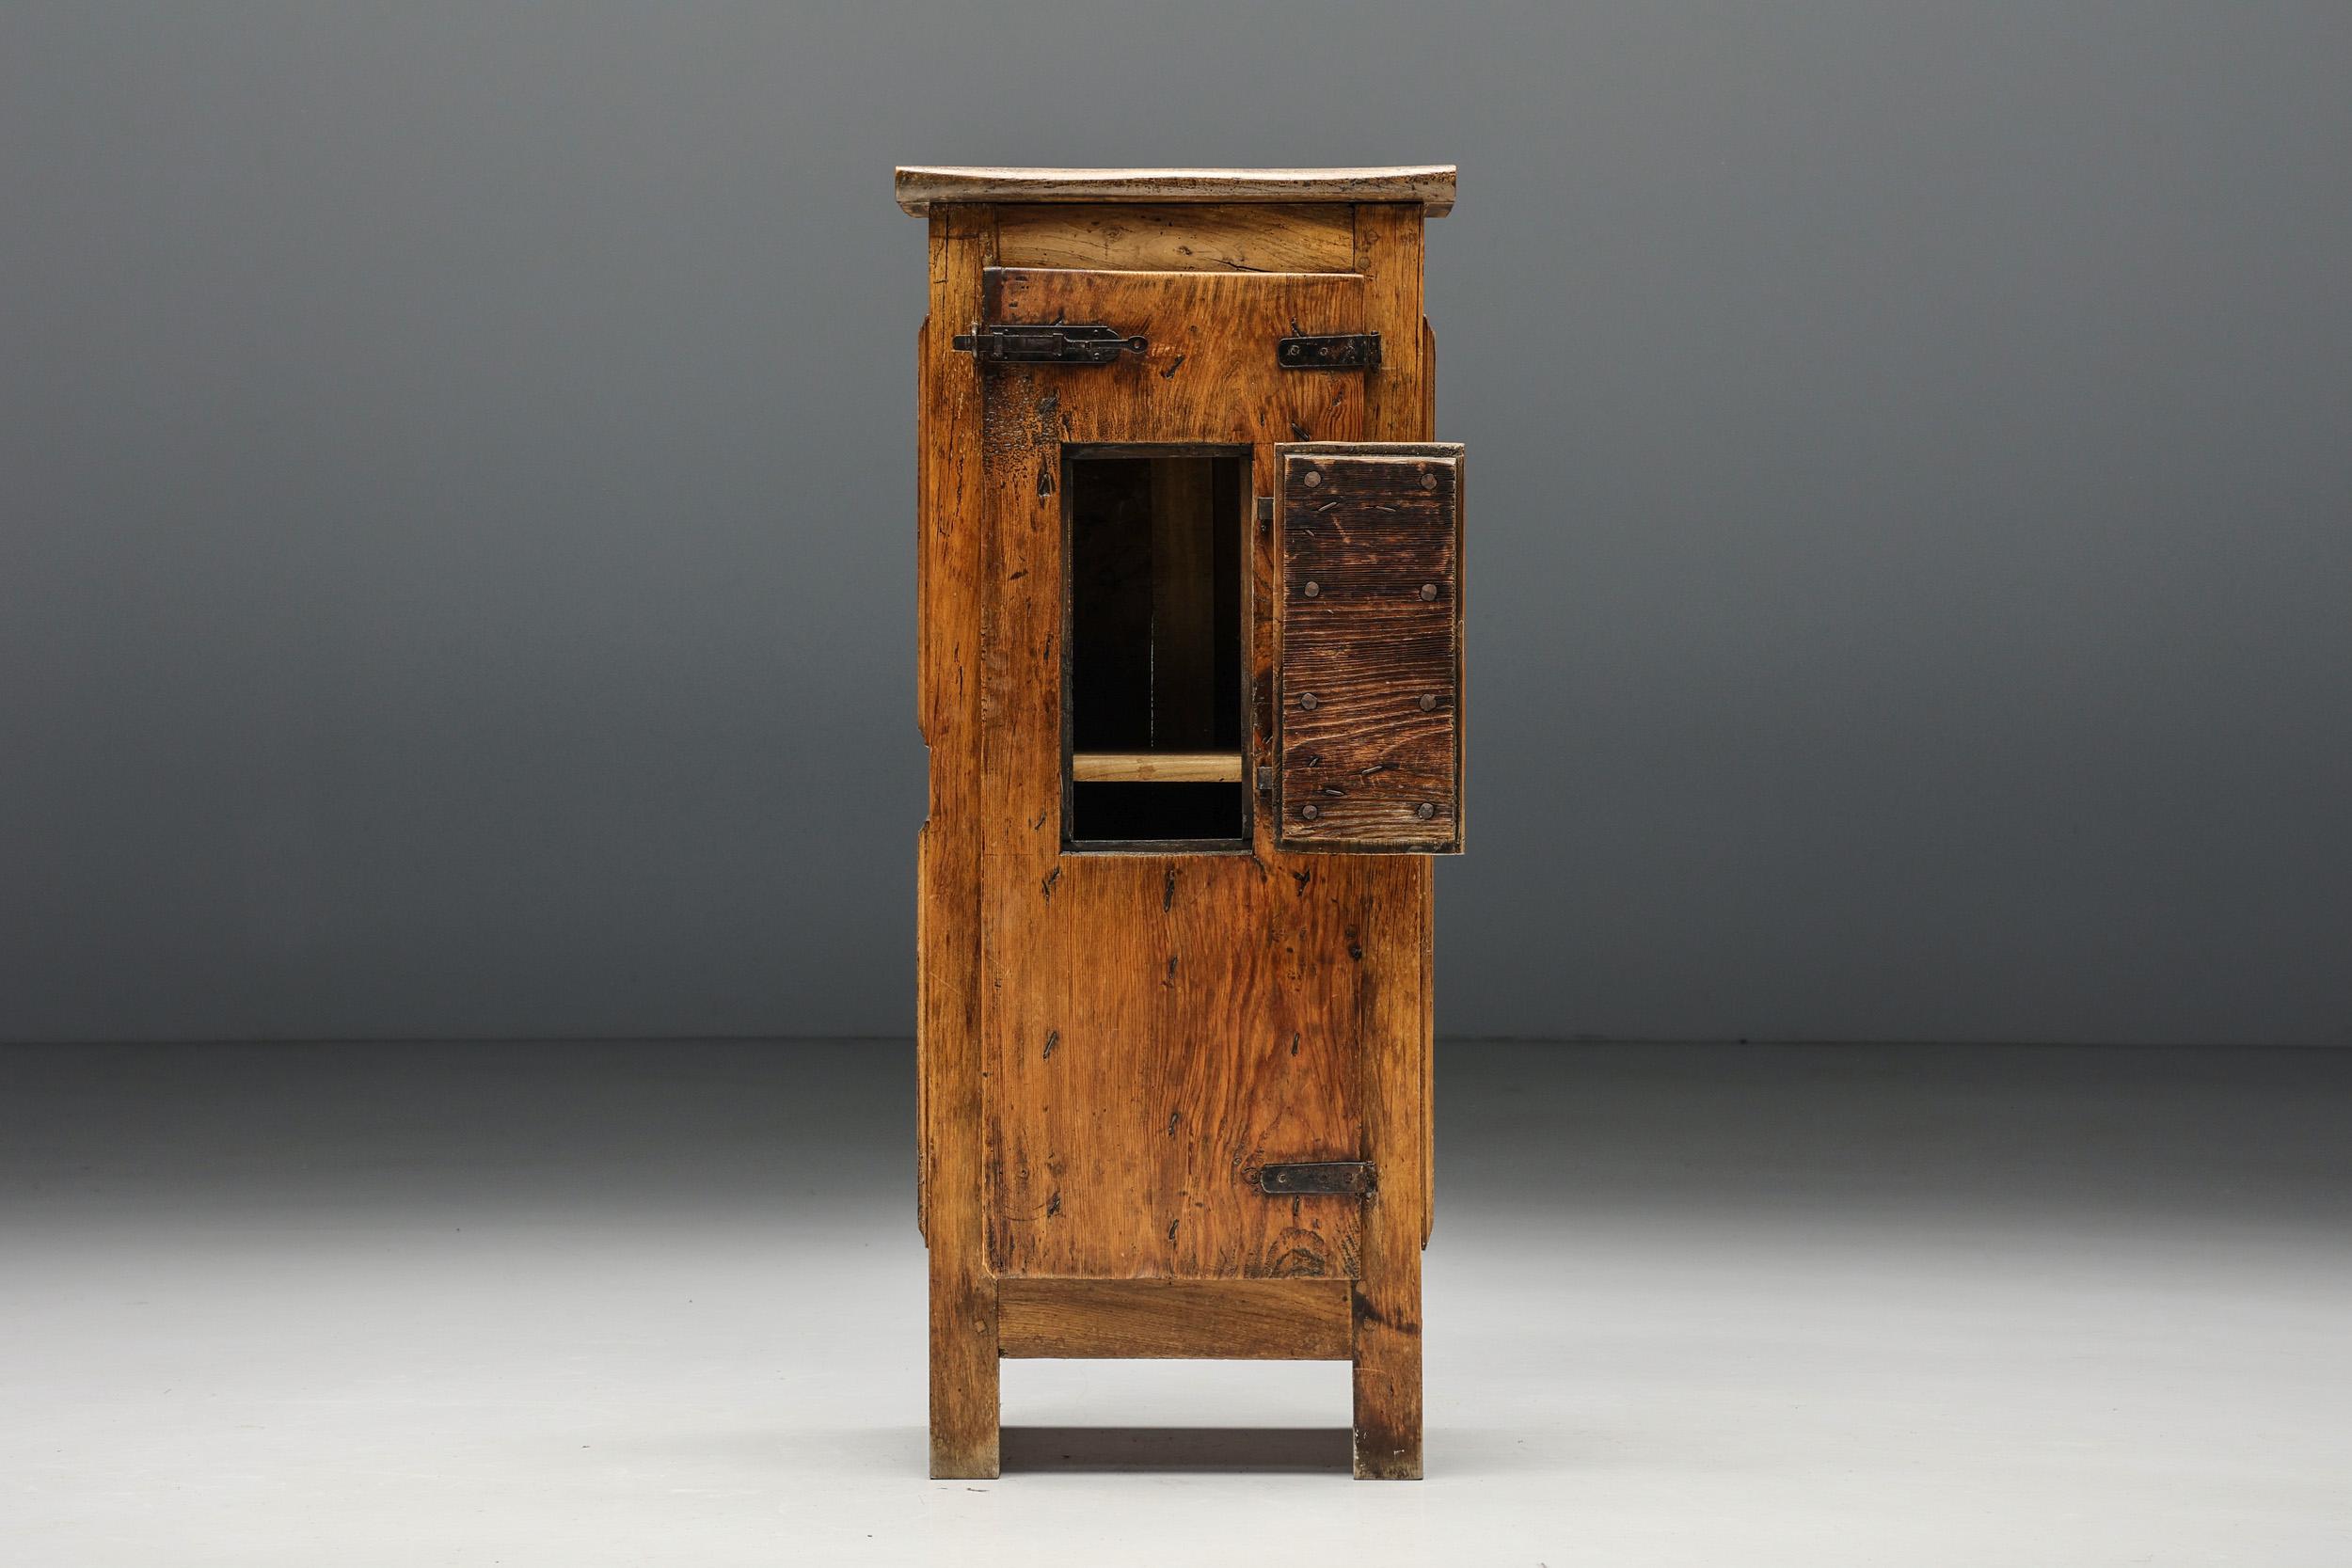 Early 20th Century Robust Cabinet, Confiturier, Artisan Solid Wood, French Craftsmanship, ca 1900